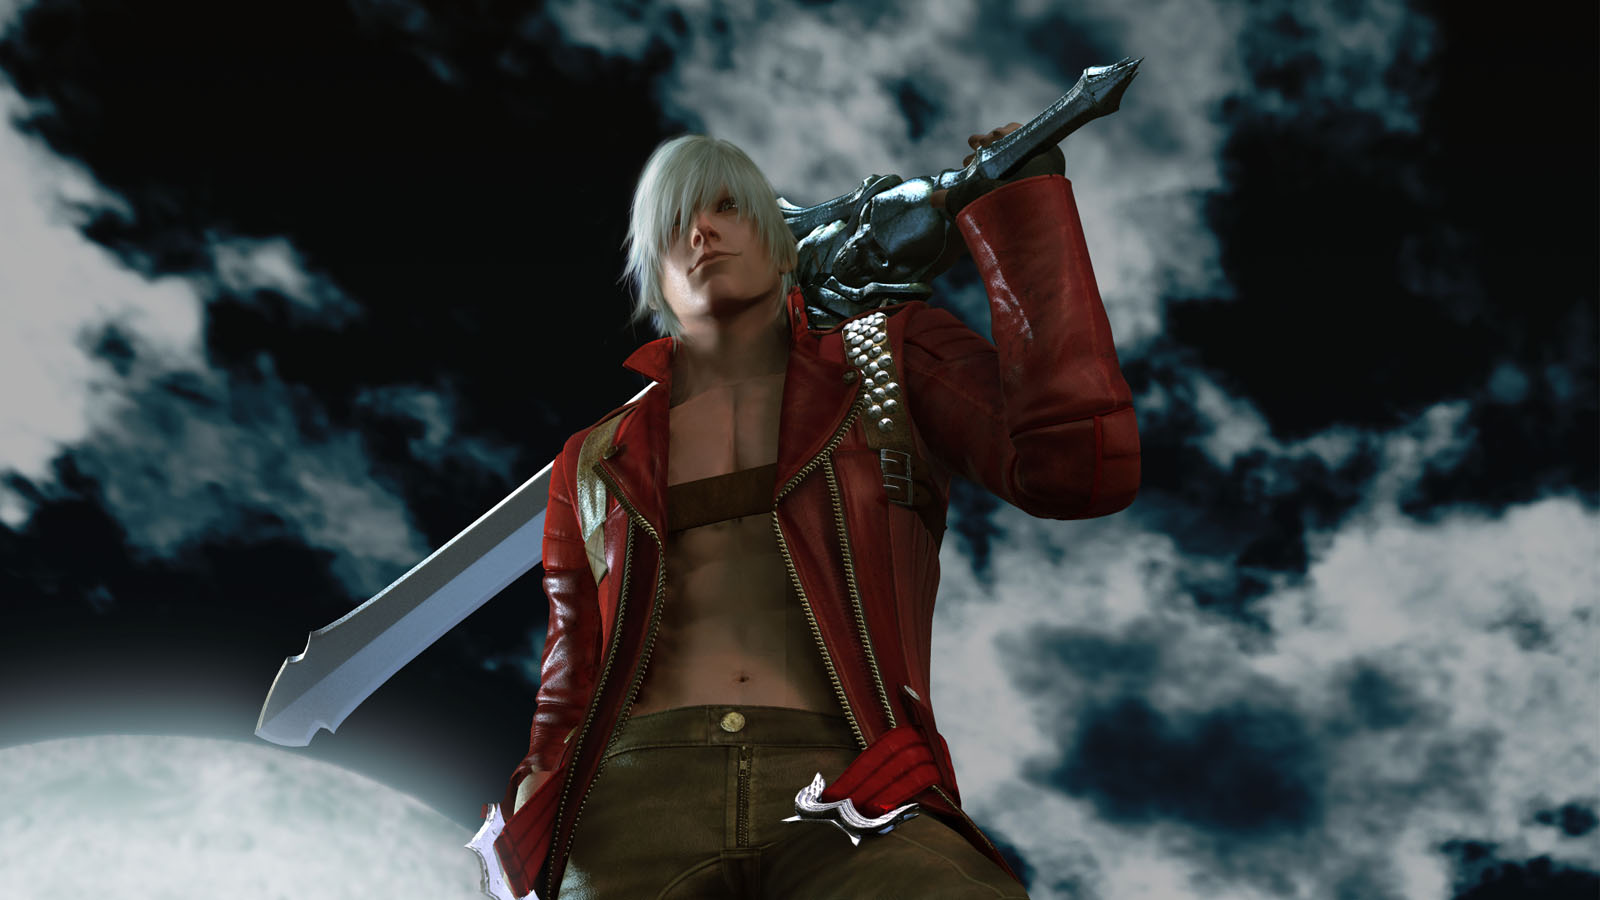 Devil May Cry 3 on Switch features new style change system